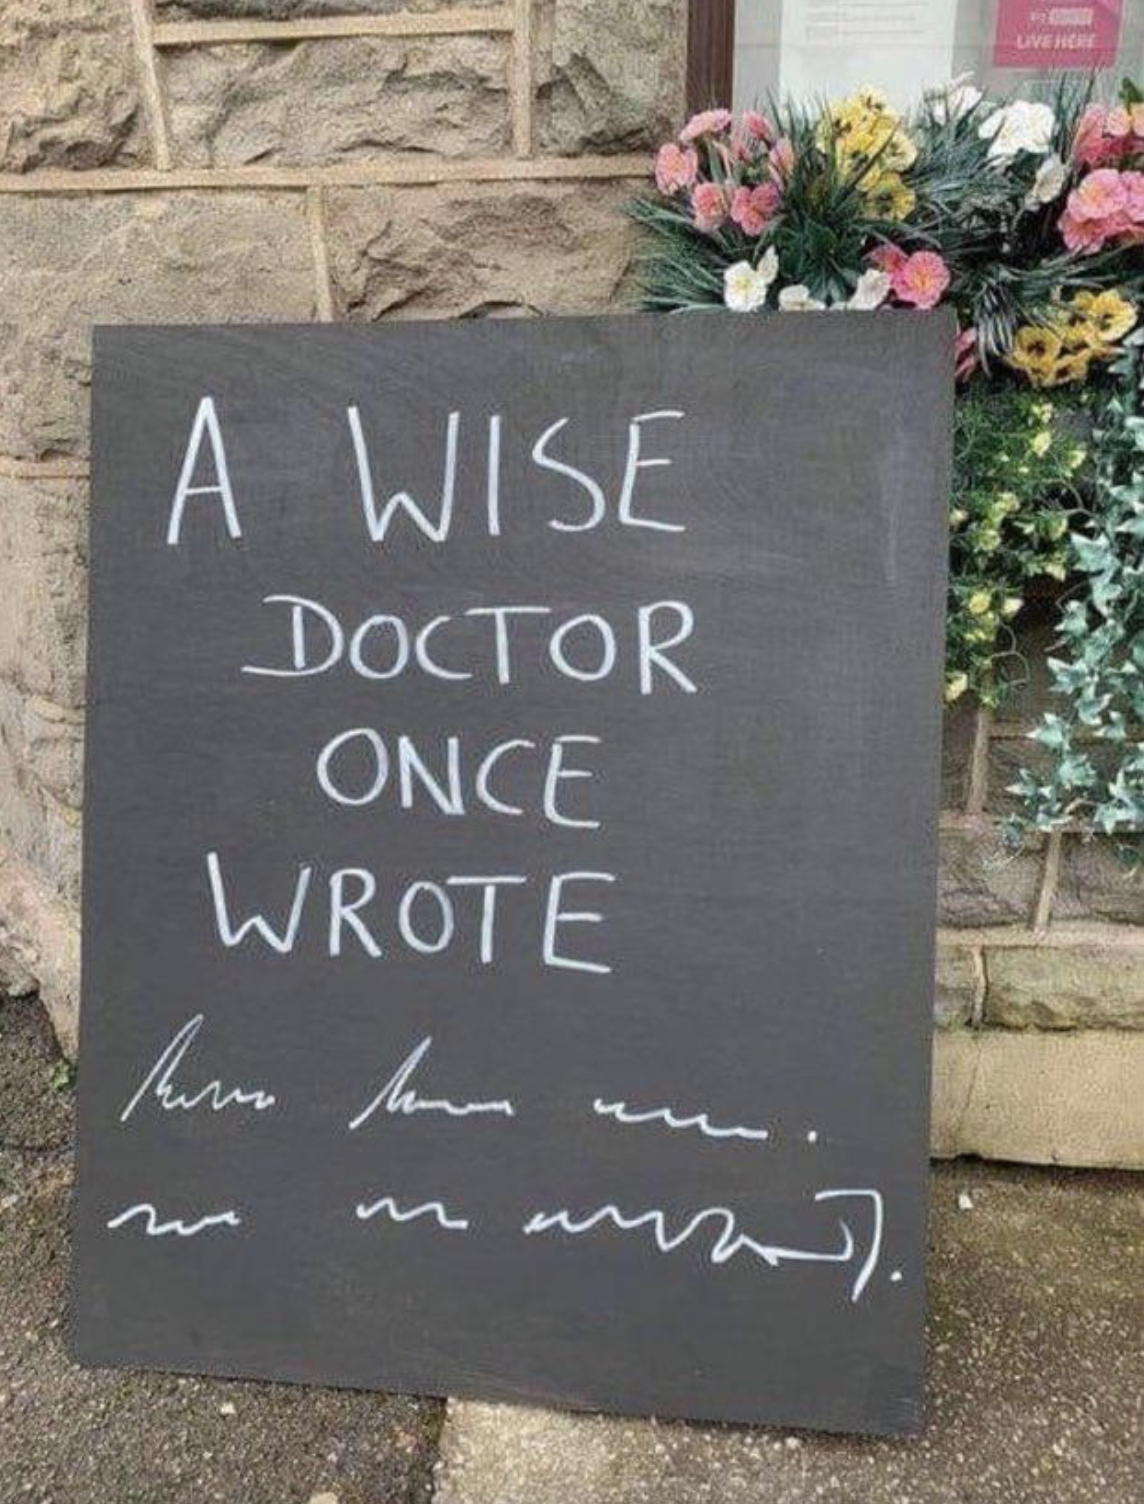 Handwritten sign on chalkboard: &quot;A wise doctor once wrote&quot; followed by an indecipherable scrawl